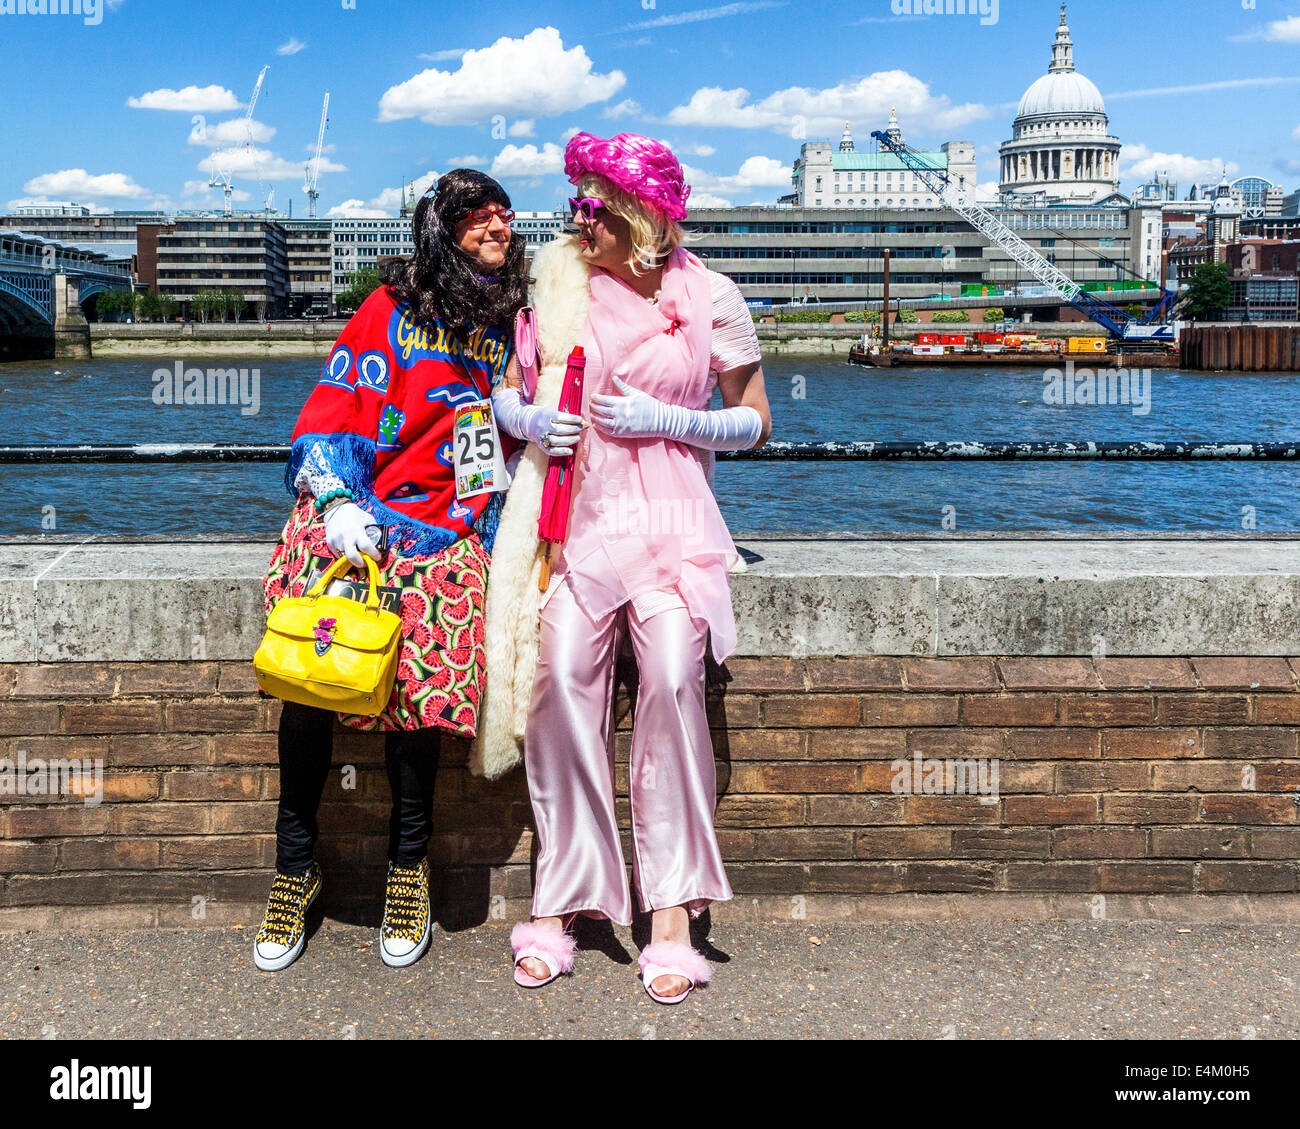 Cross dressing for 'Walk for Life 2014' - two men in woman's clothing in HIV AIDS charity race - South Bank, London, UK Stock Photo